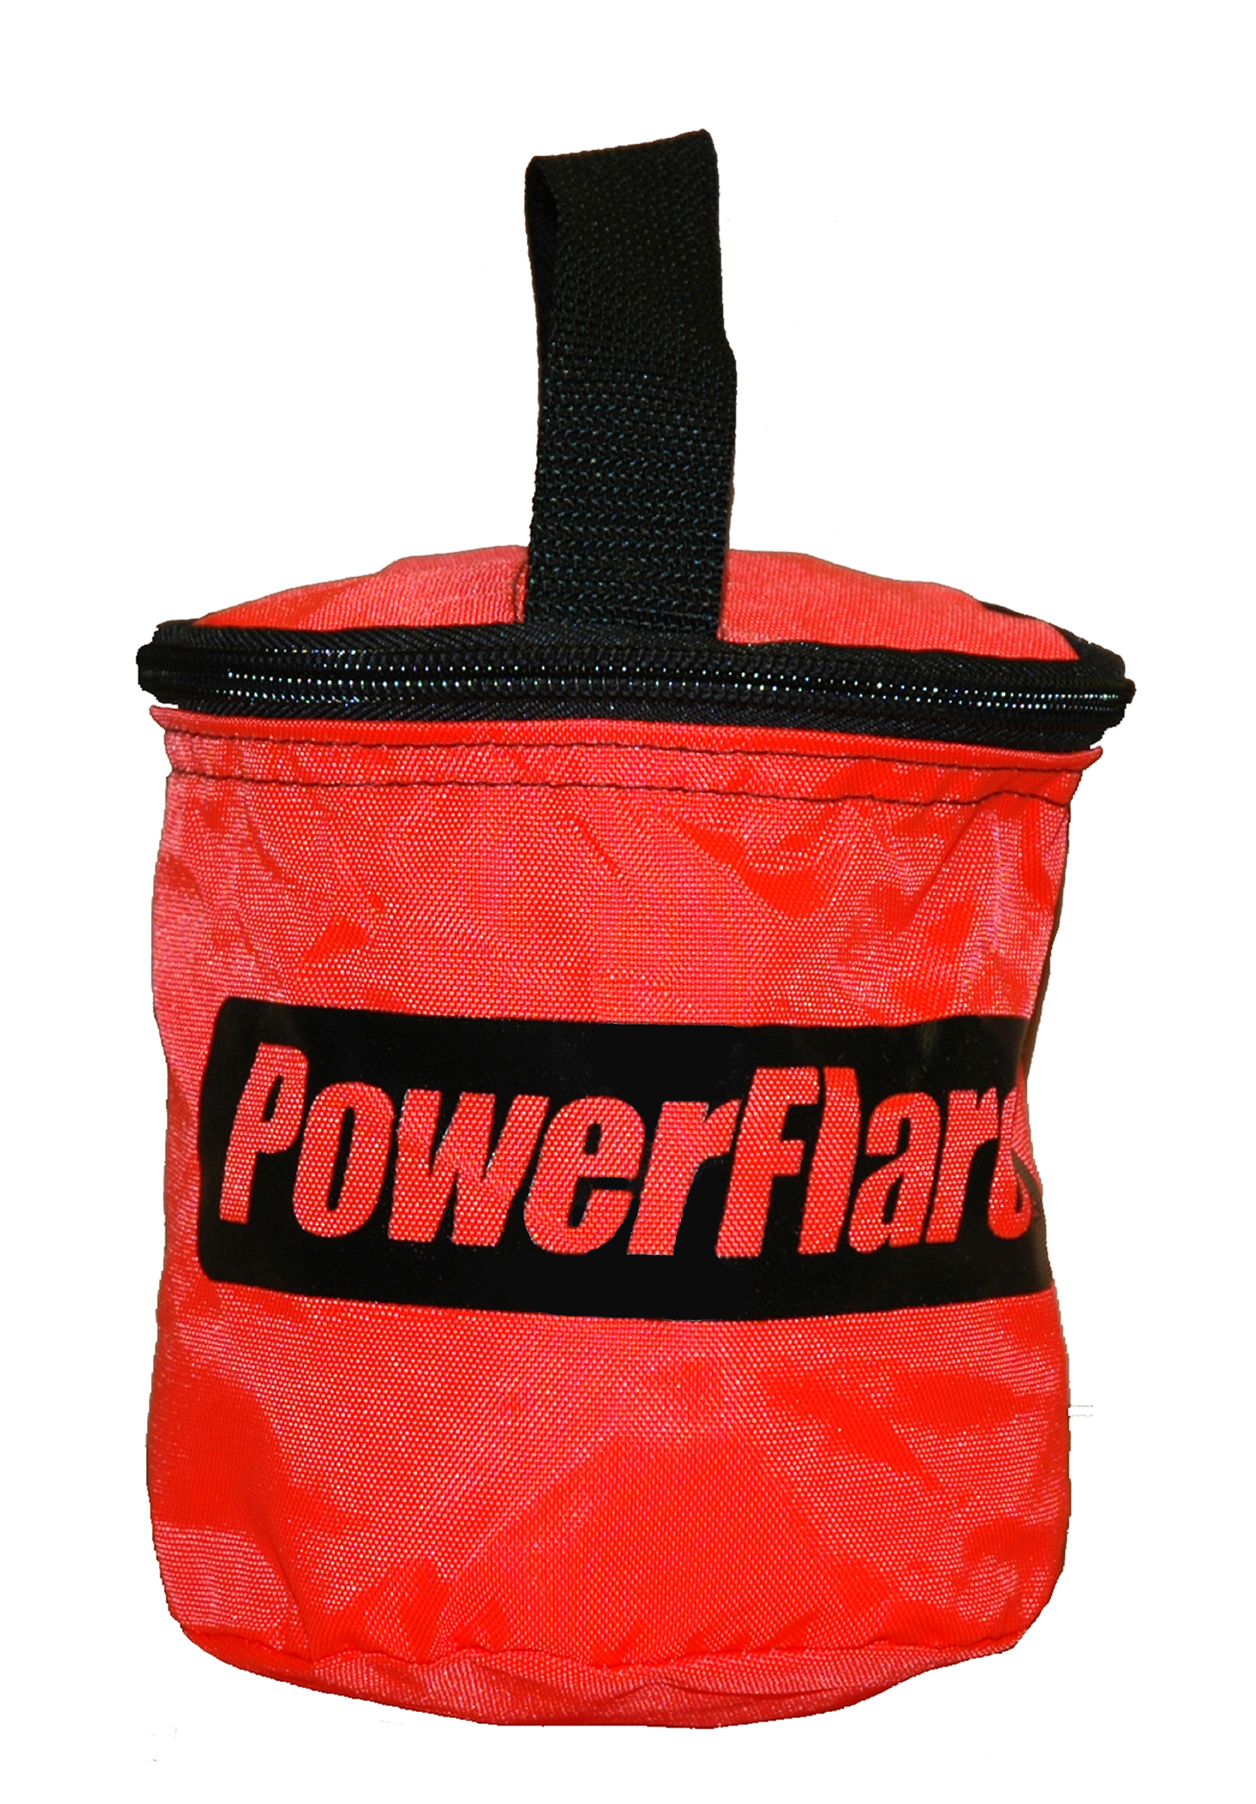 PowerFlare Small Storage & Carry Bag - holds 4 PF-200 Safety Lights